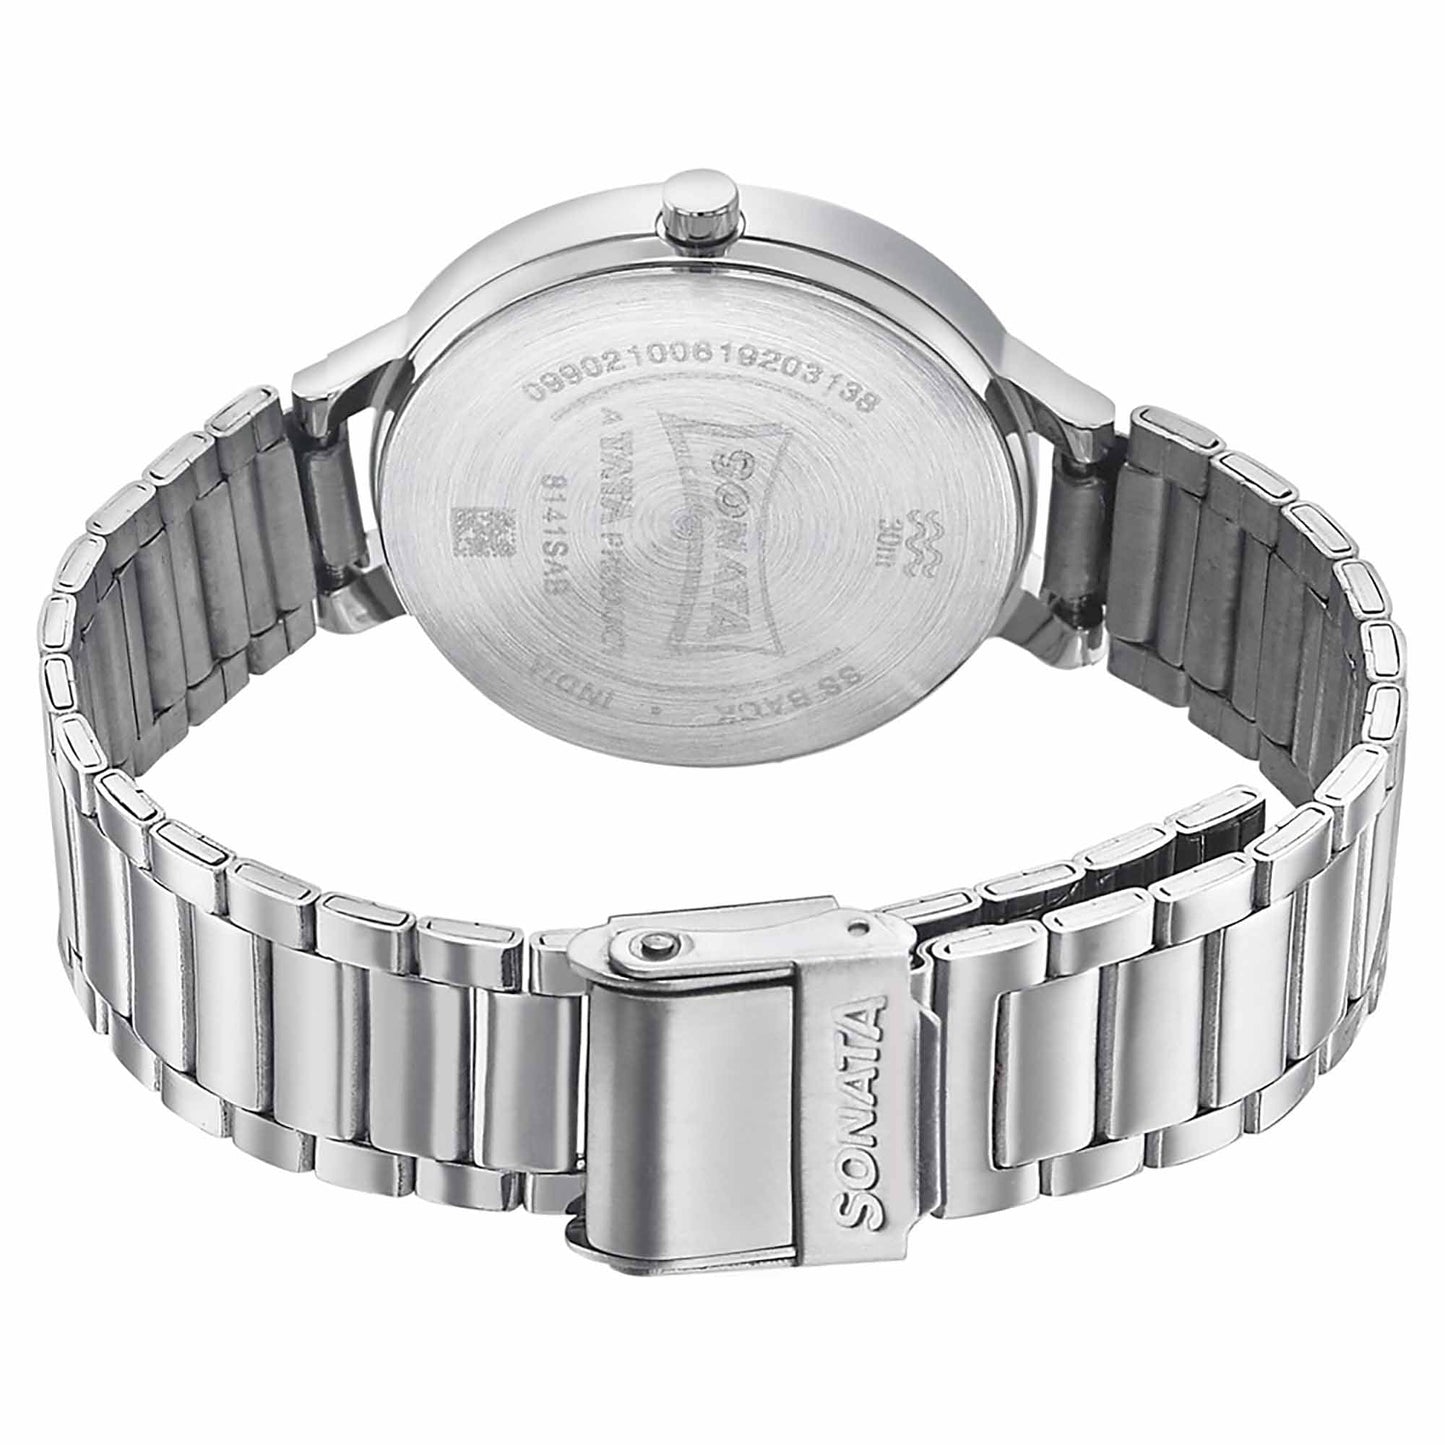 Sonata Play Silver Dial Women Watch With Stainless Steel Strap